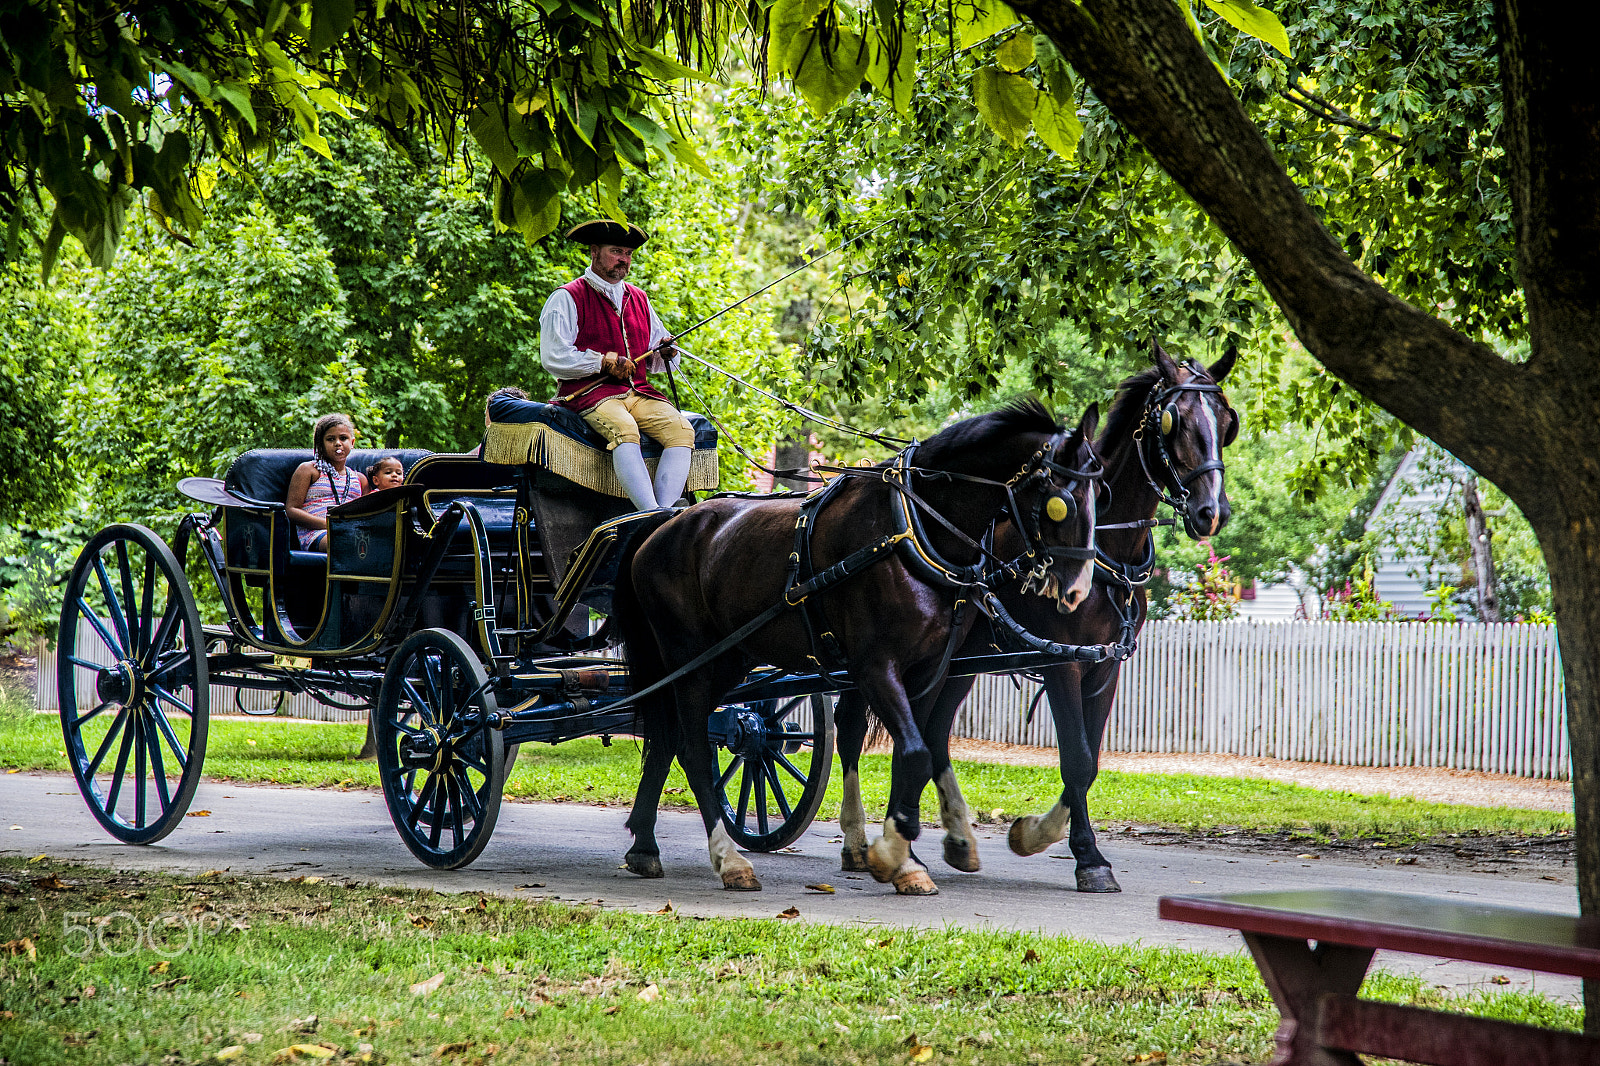 Canon EOS-1D X Mark II + Sigma 24-105mm f/4 DG OS HSM | A sample photo. Coachman and passengers in horse carriage 11541t photography